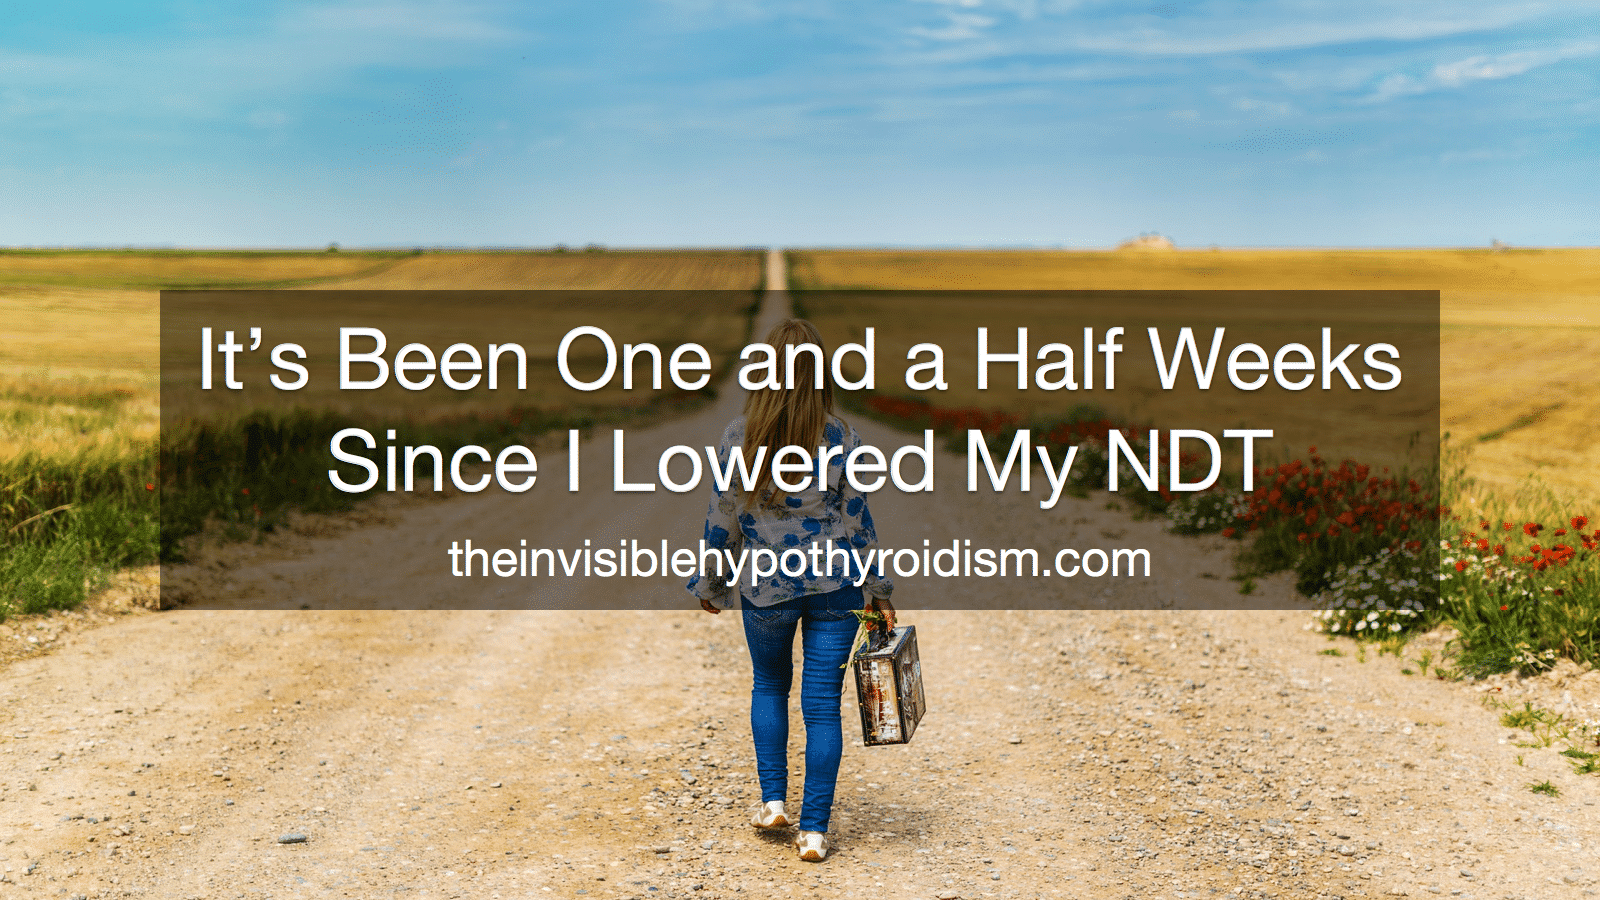 It's Been One and a Half Weeks Since I Lowered My NDT Dosage